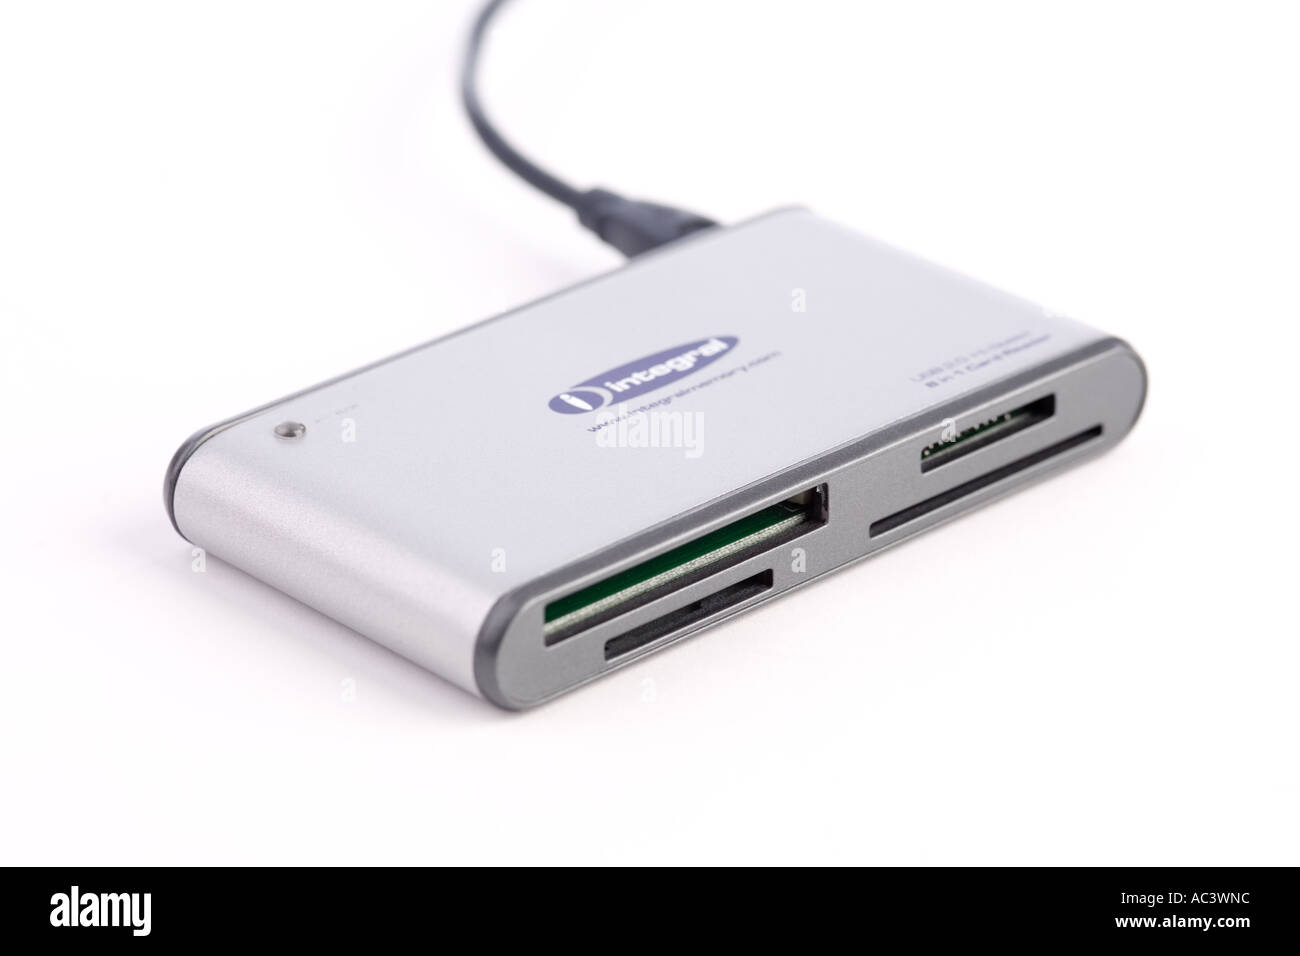 flash card reader to transfer data, songs, photos and files between a memory  card and a laptop or pc computer Stock Photo - Alamy